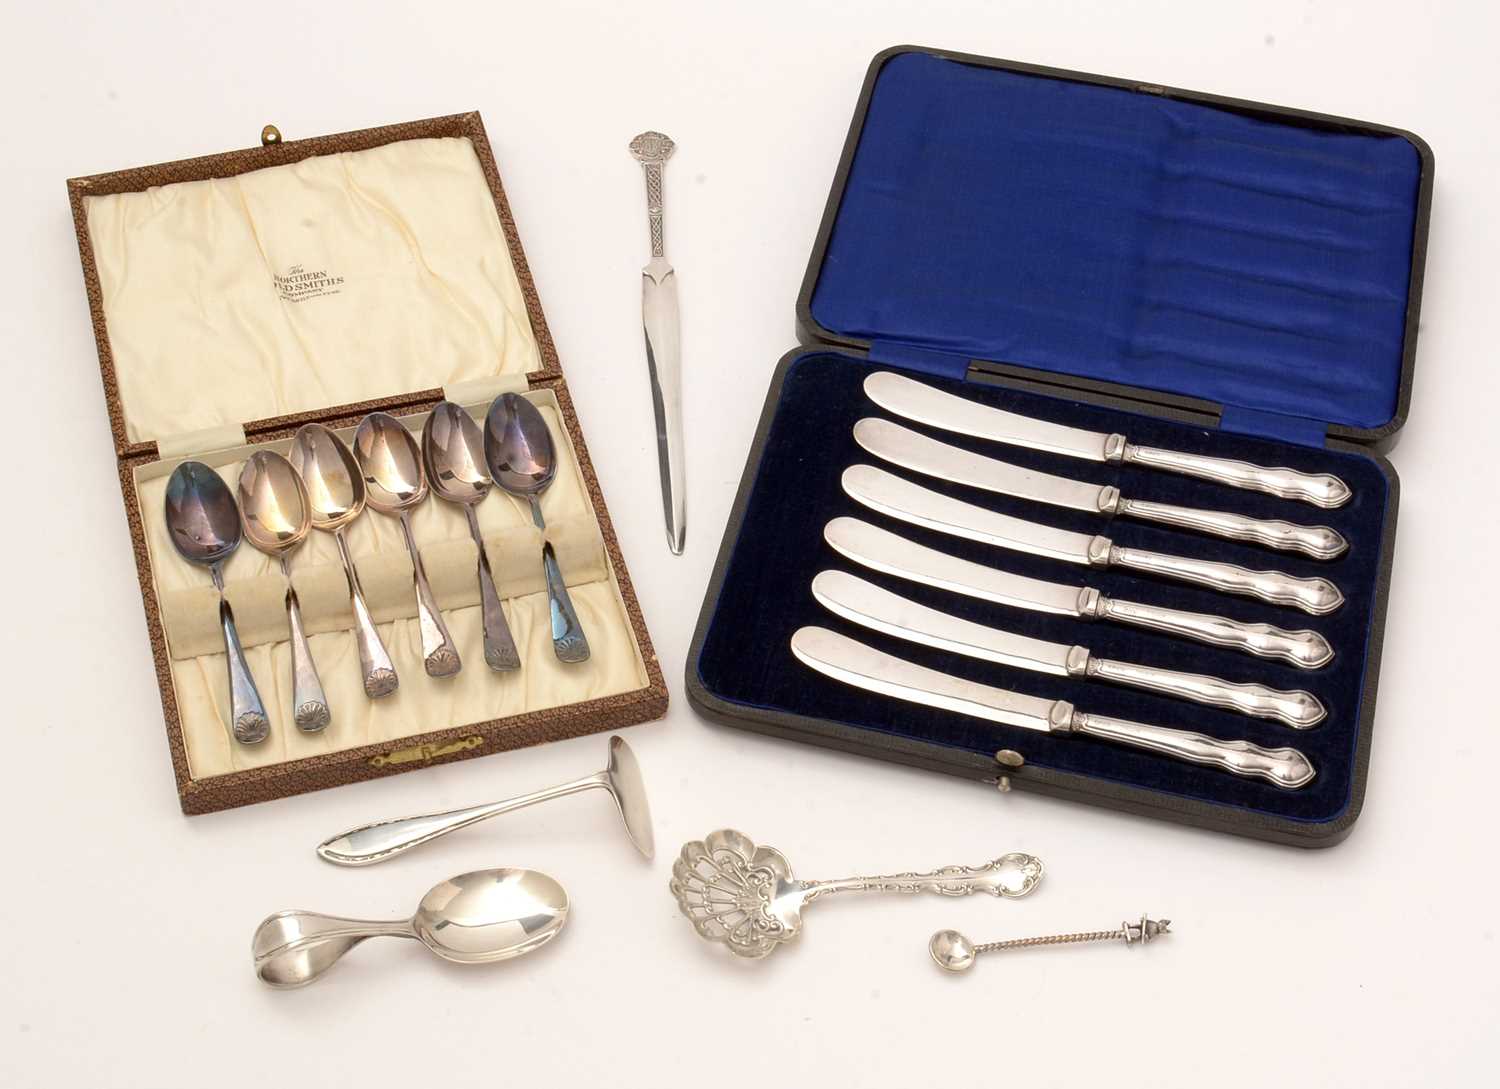 Silver and electroplate flatware.